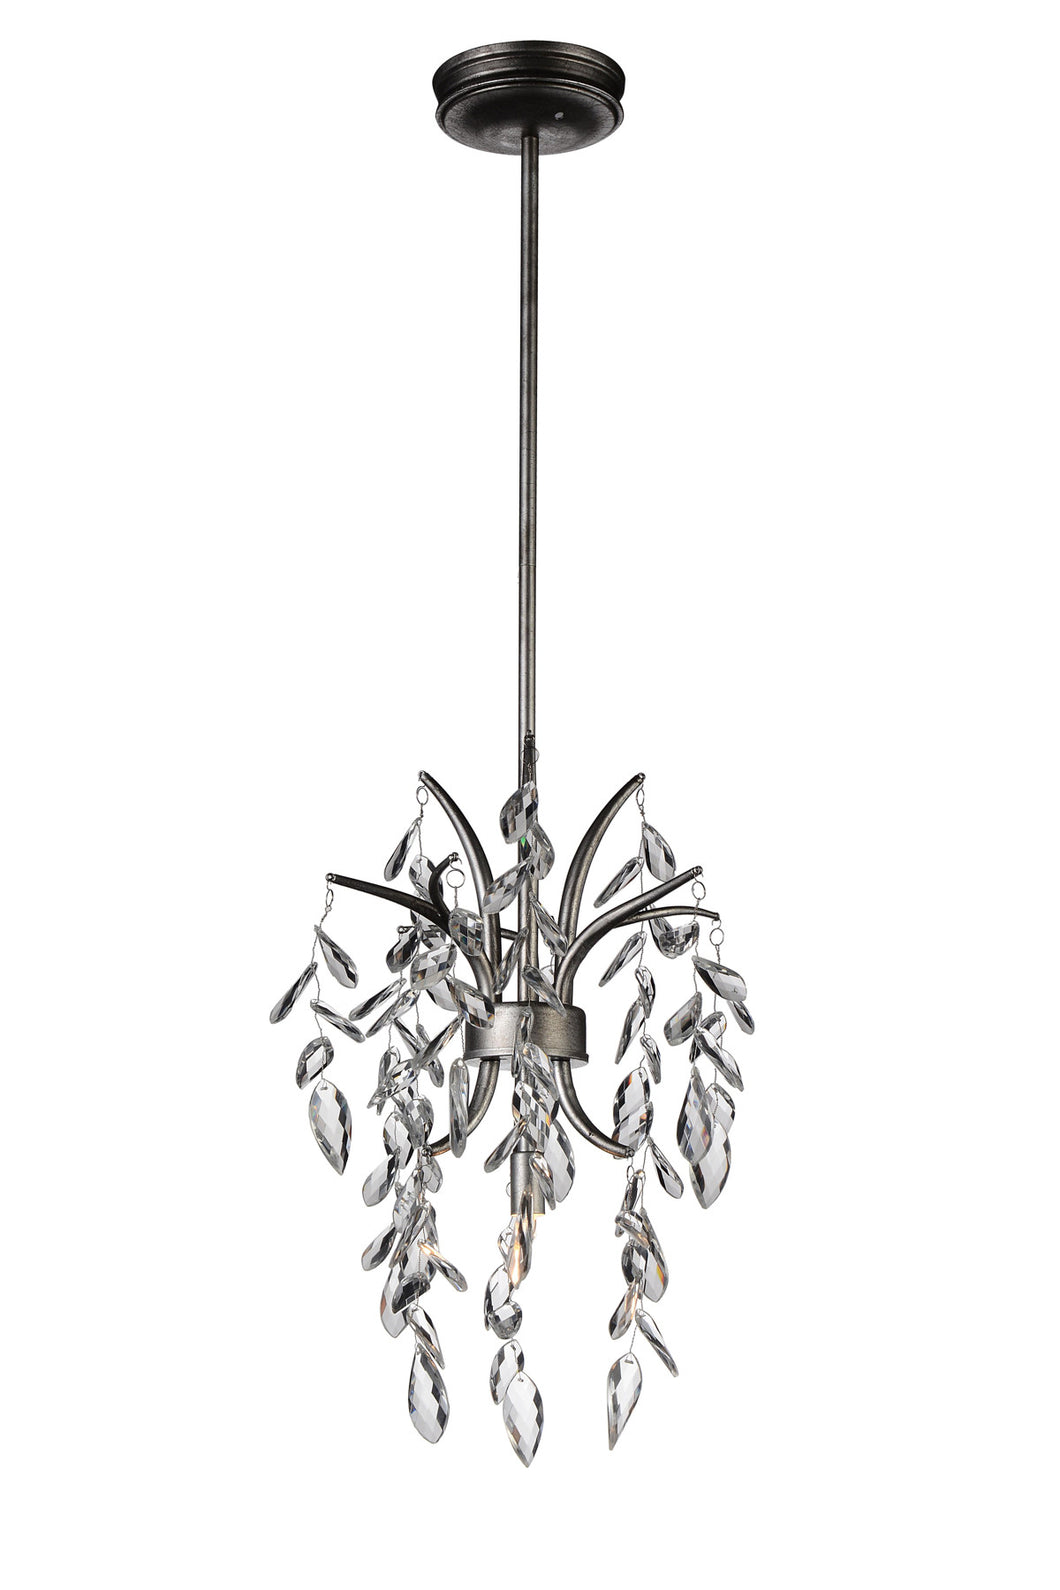 1 Light Down Mini Chandelier with Silver Mist finish